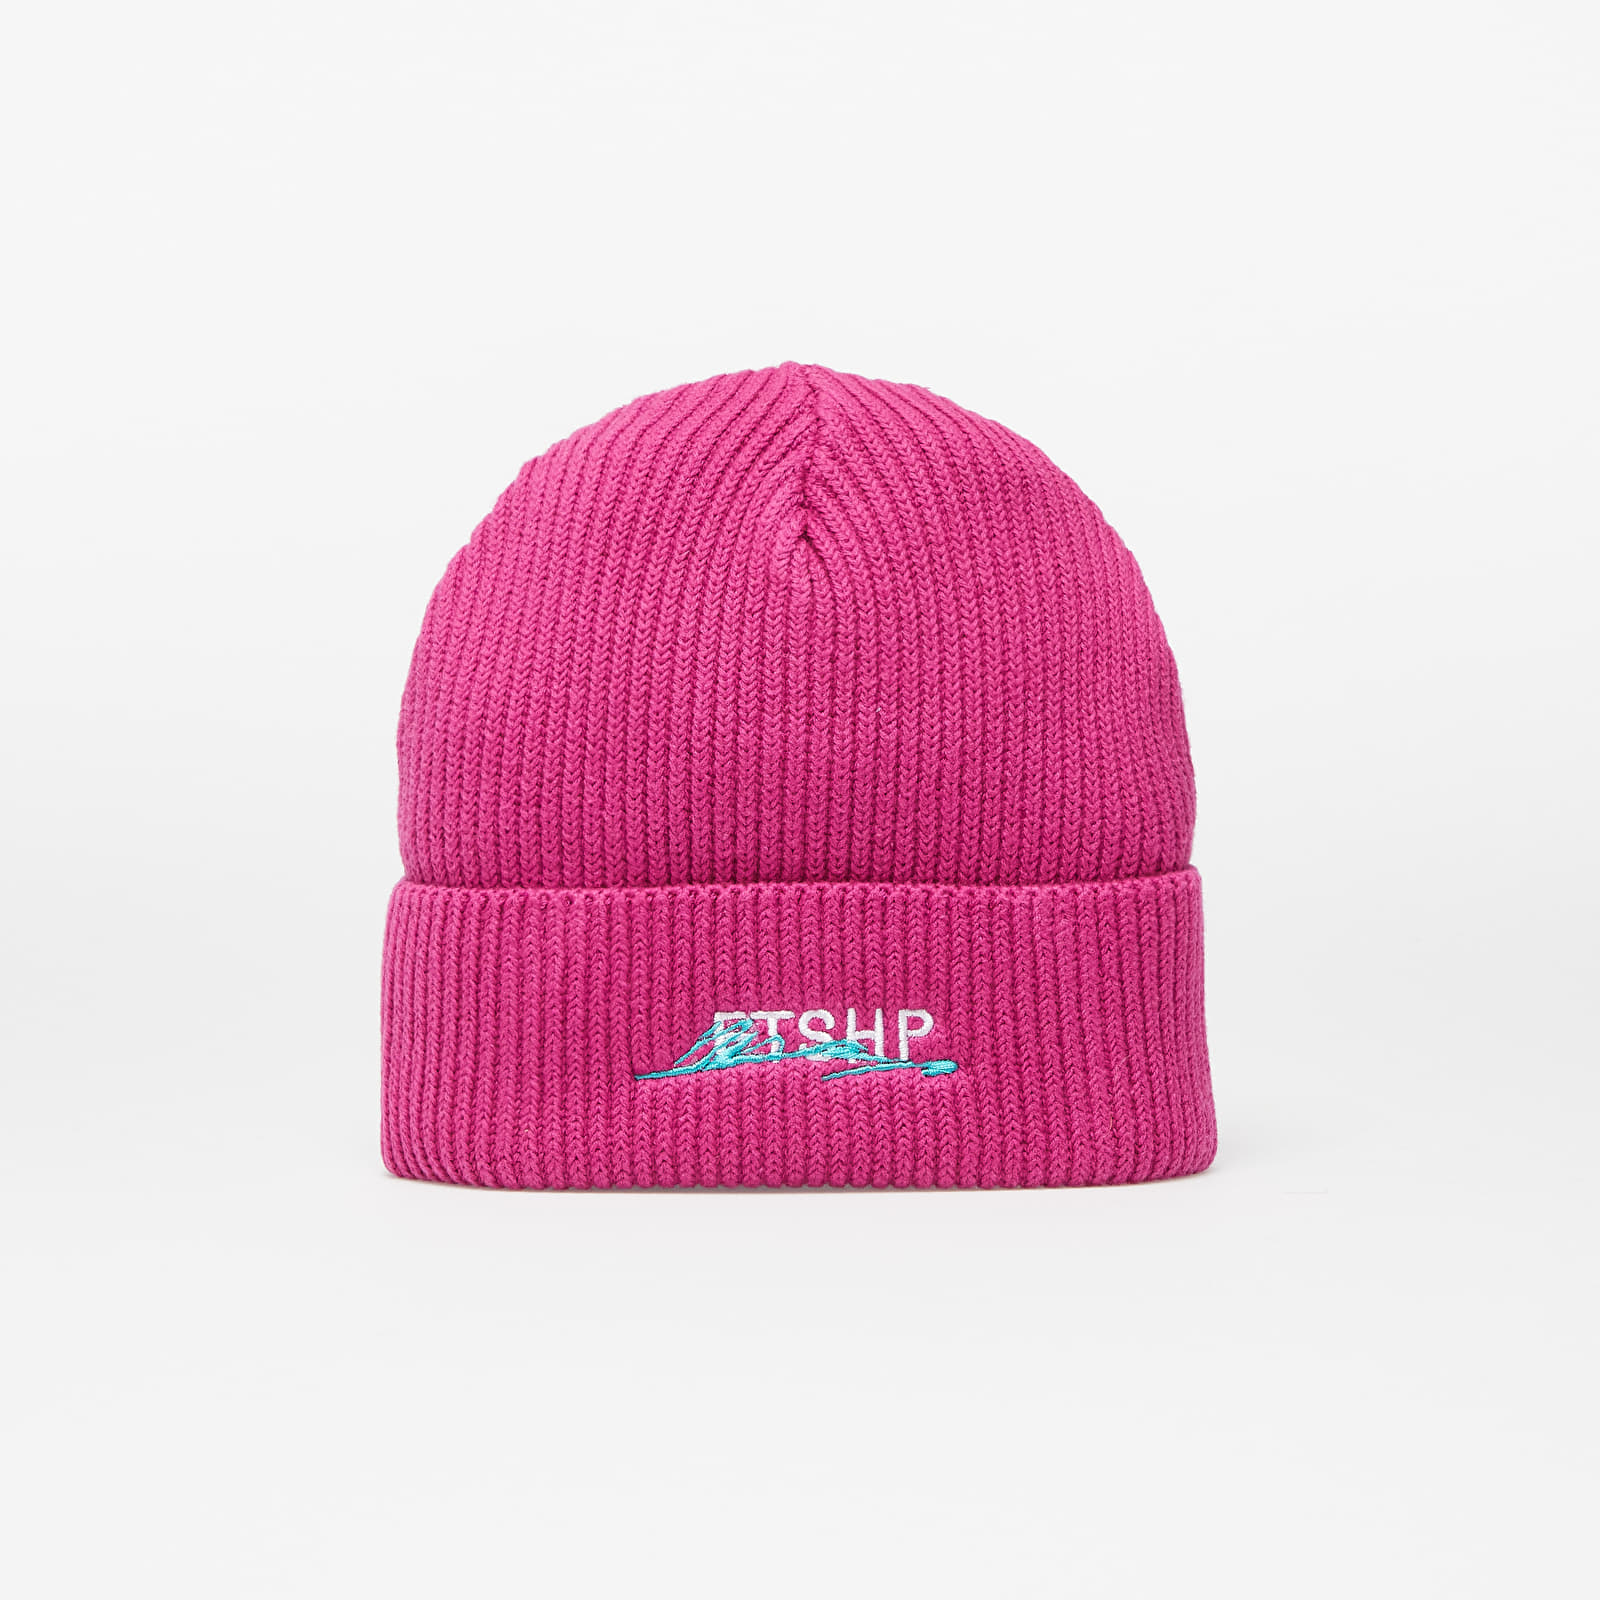 FTSHP Beanie Orchid Flowers